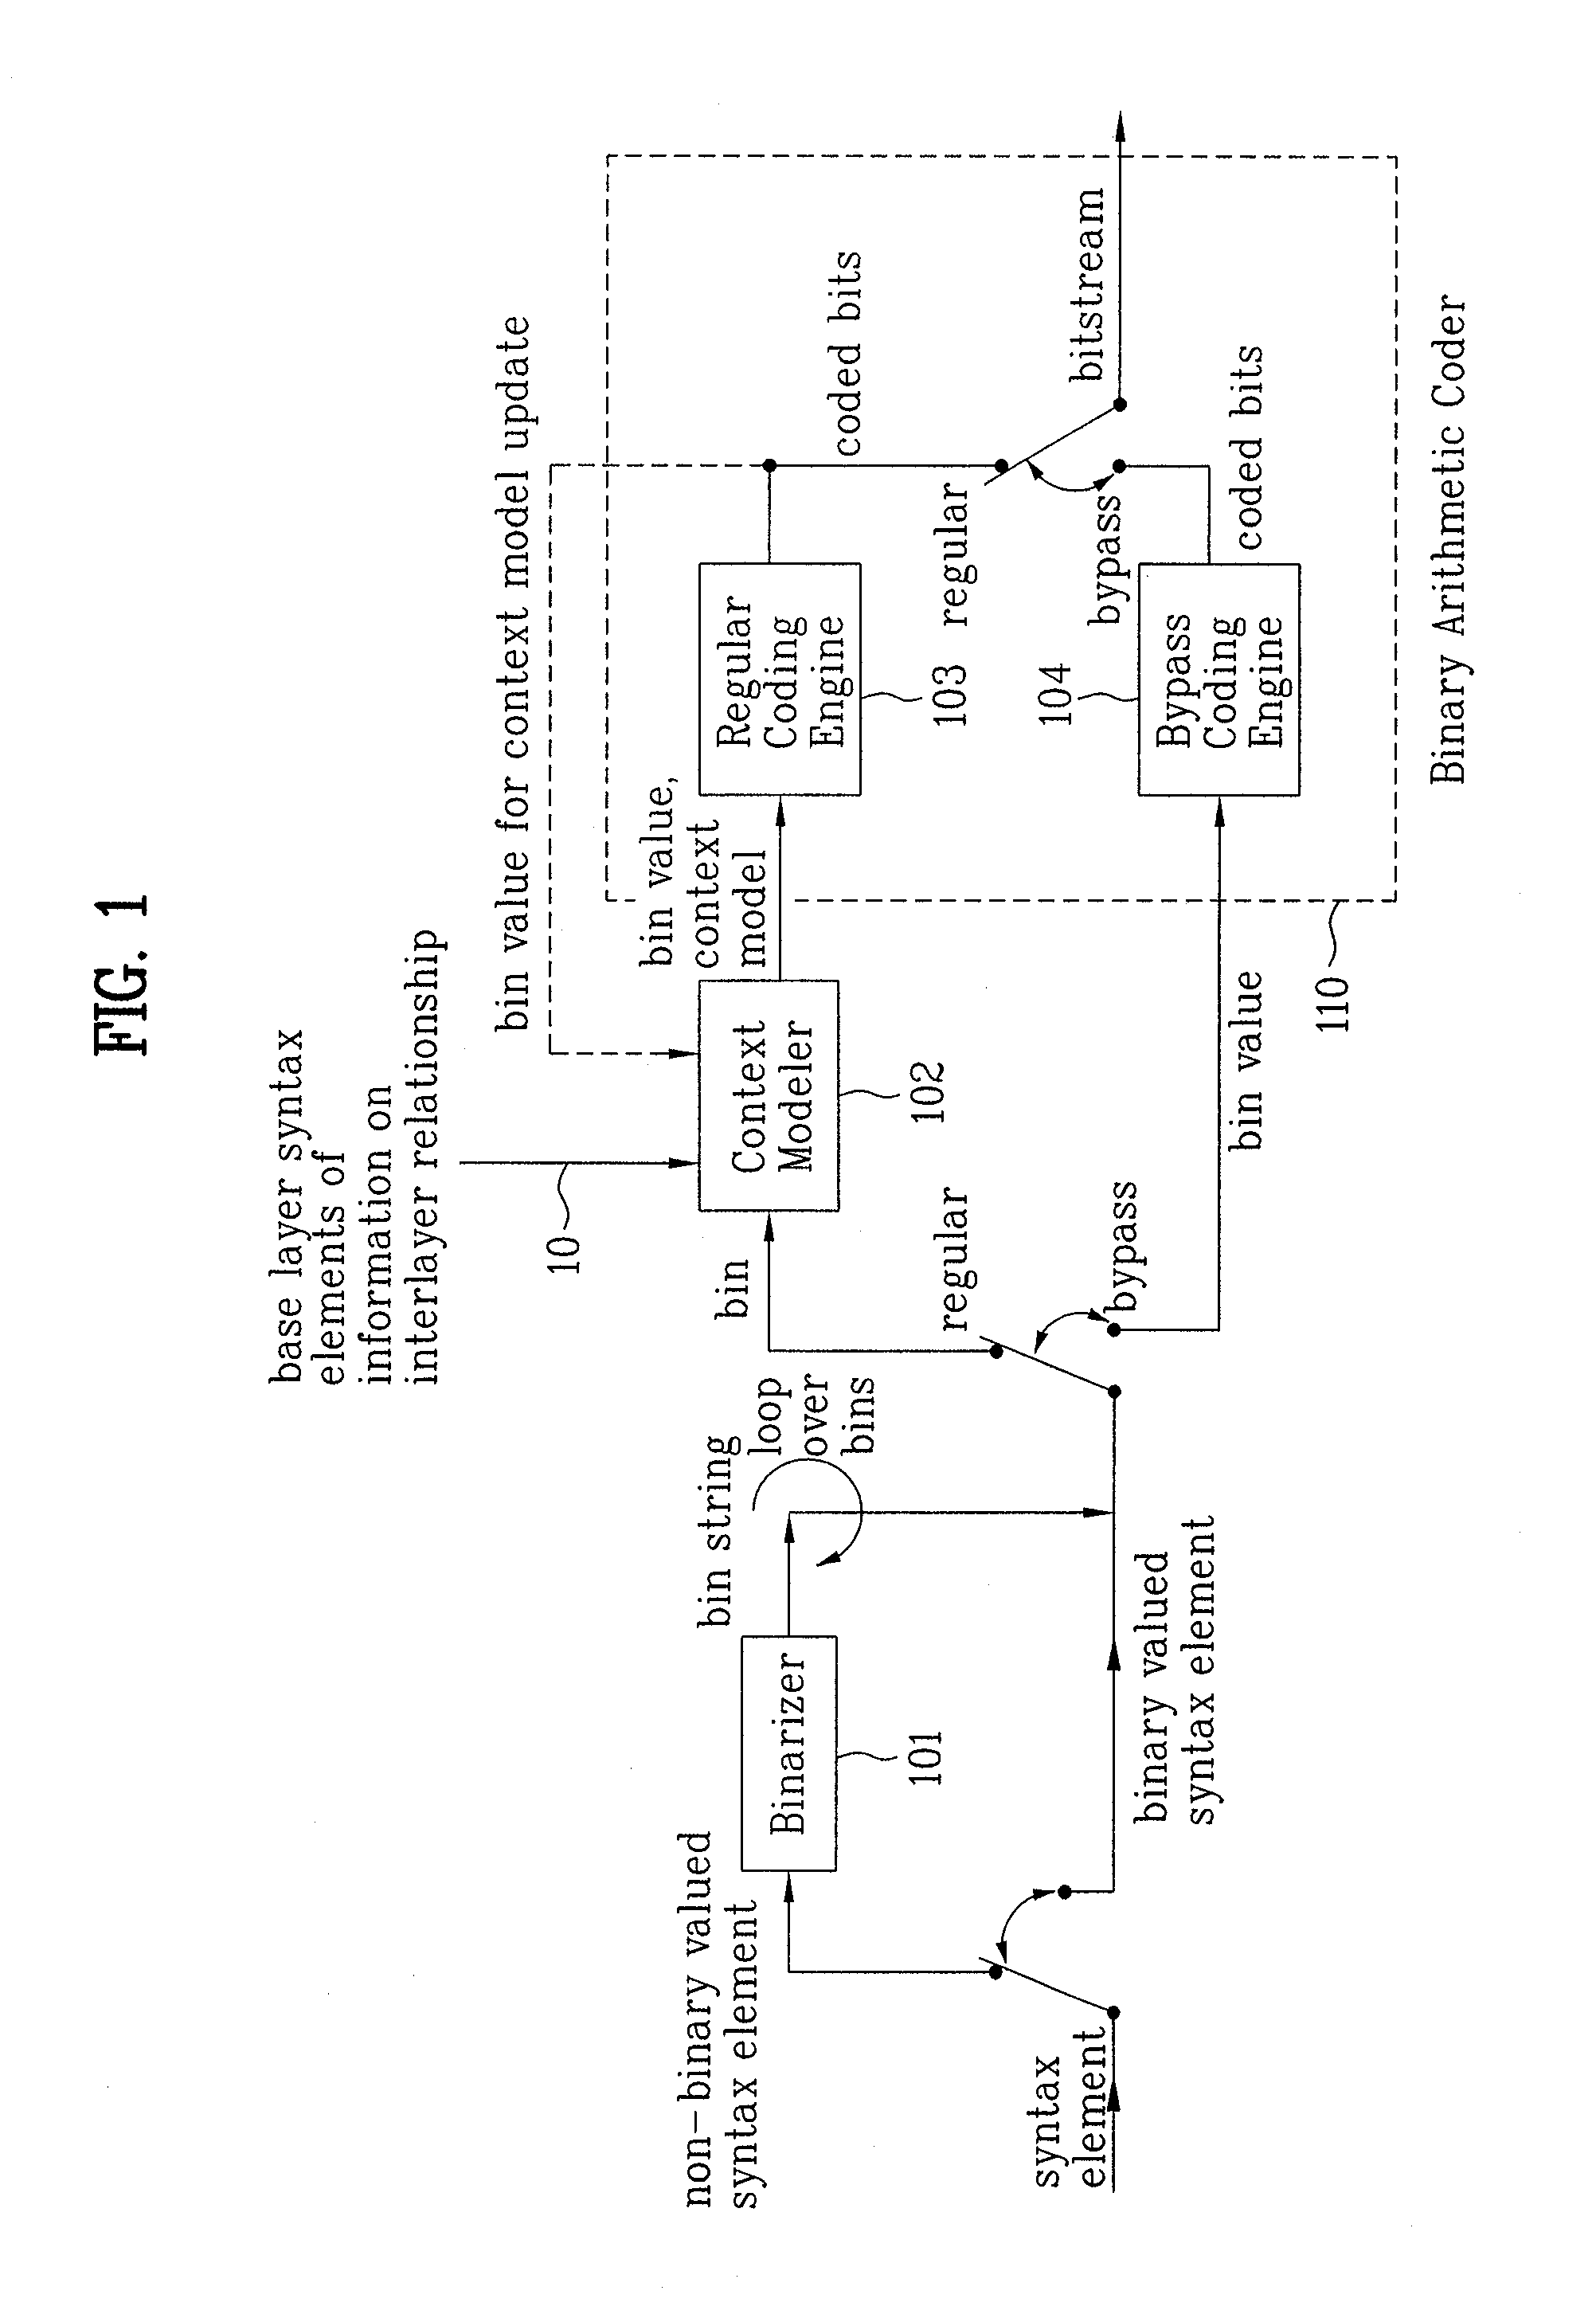 Method for Modeling Coding Information of a Video Signal To Compress/Decompress the Information